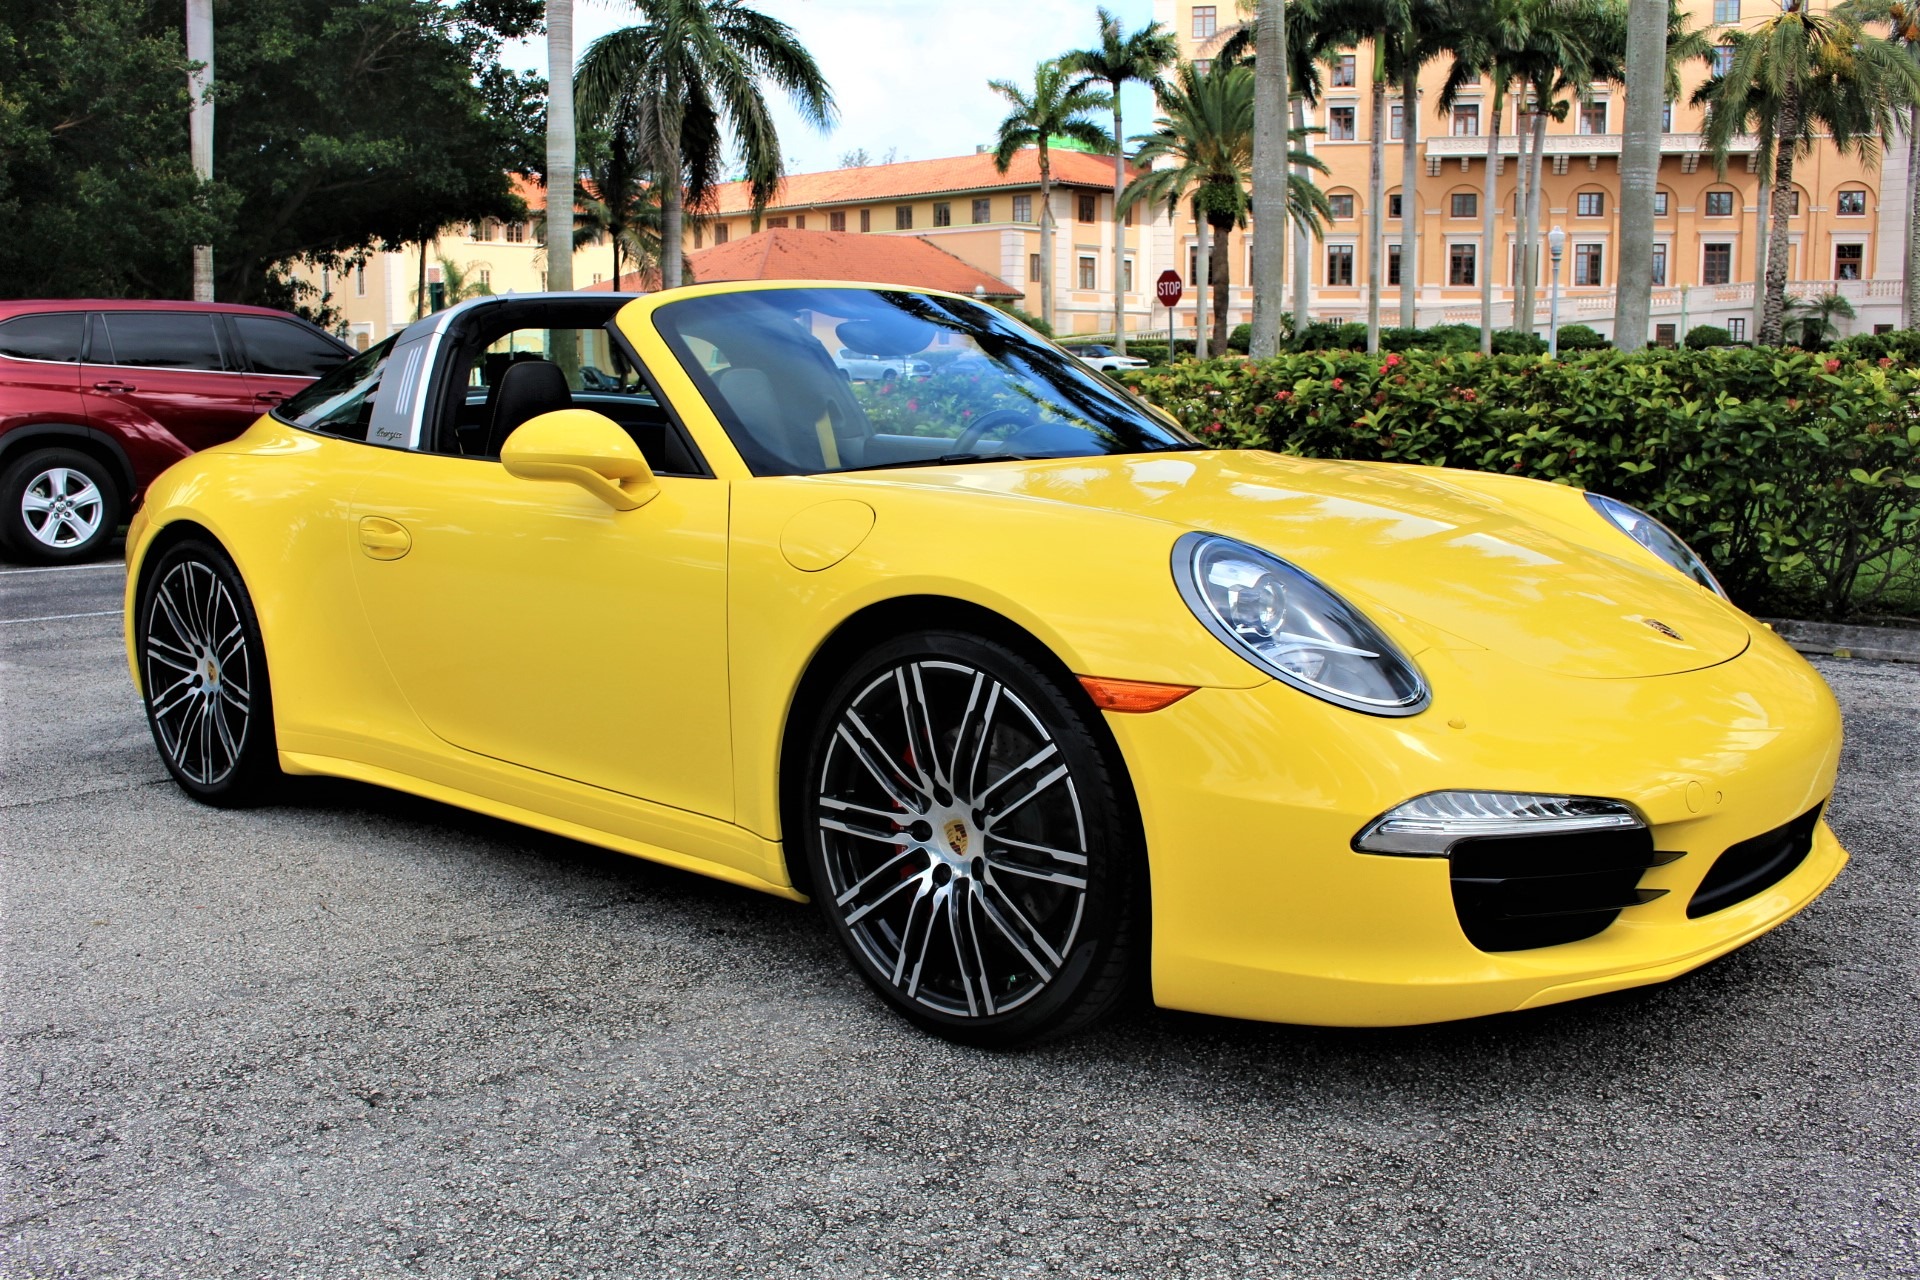 Used 2015 Porsche 911 Targa 4S Exclusive Edition for sale Sold at The Gables Sports Cars in Miami FL 33146 2